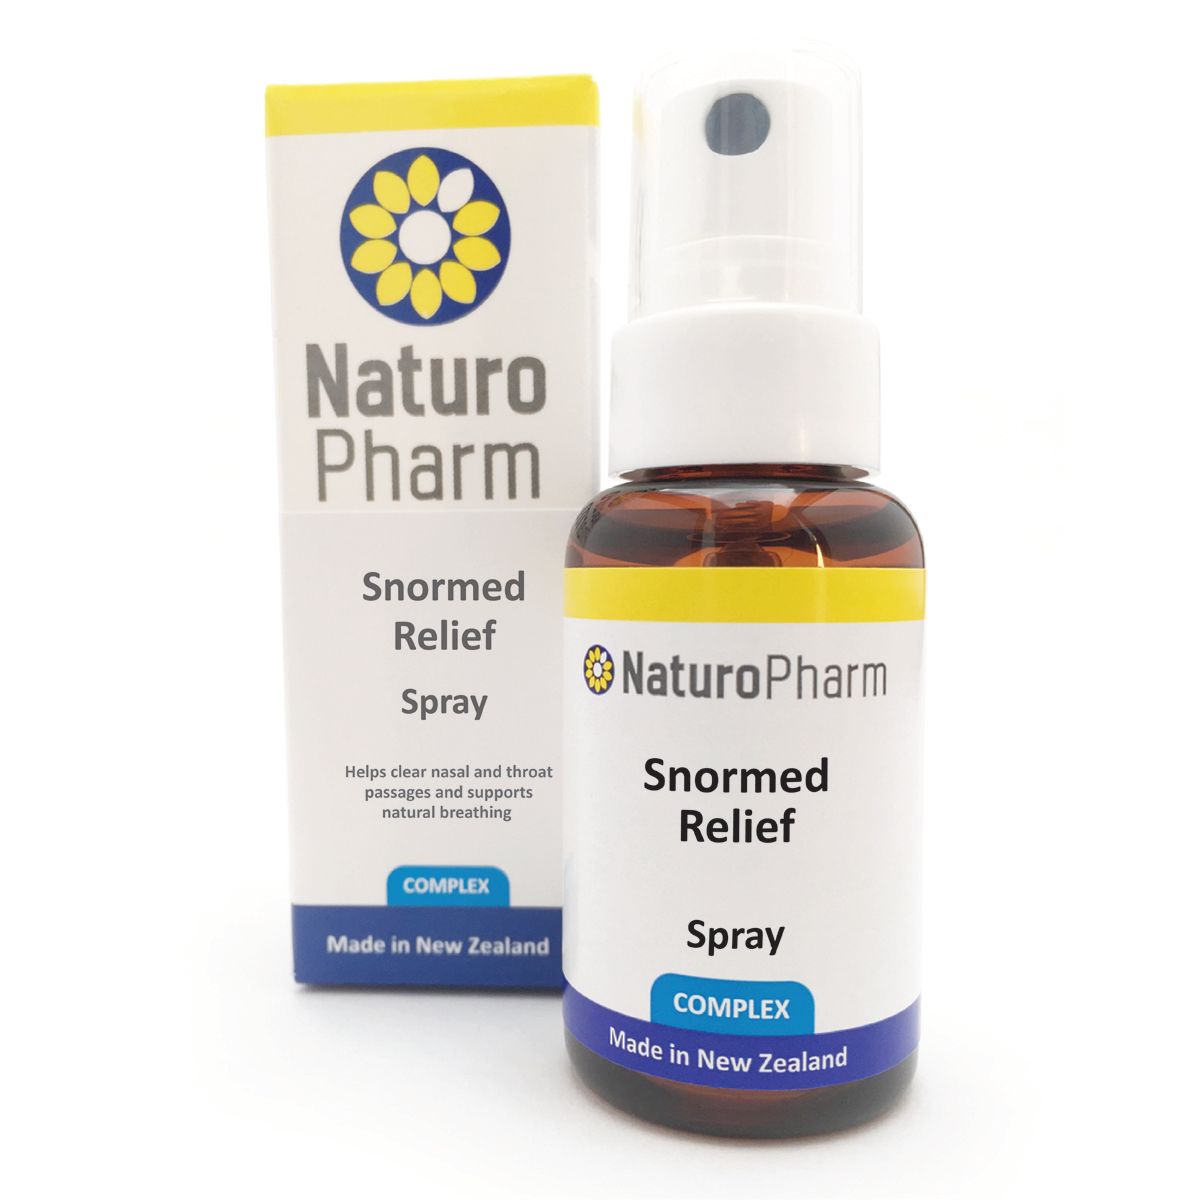 Naturo Pharm Snormed Relief